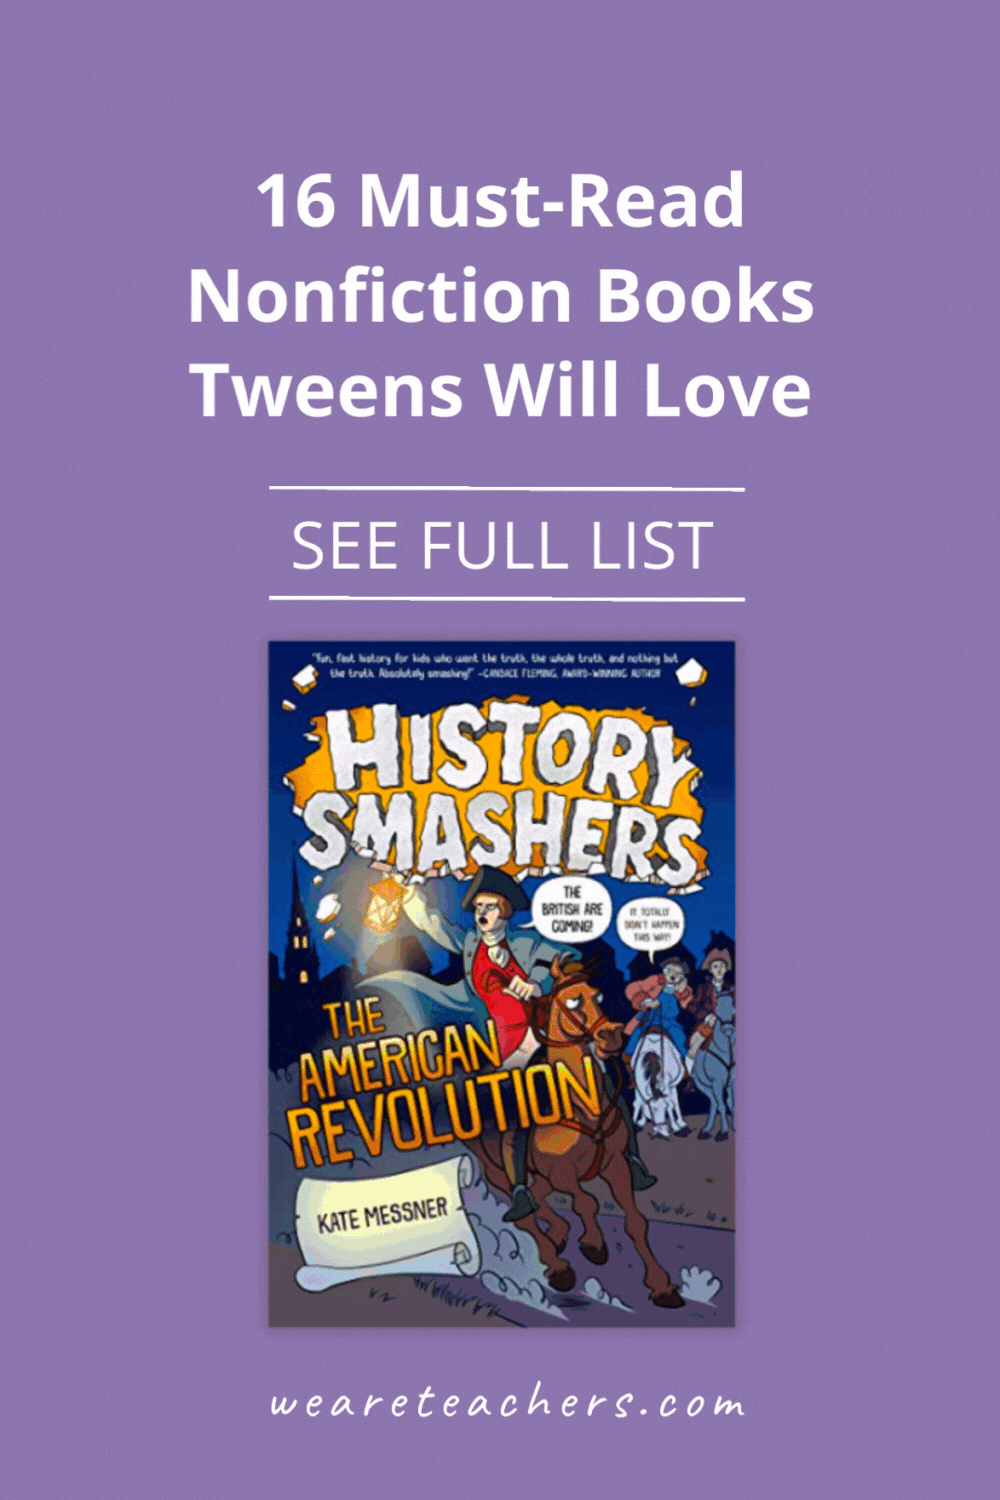 Share the best and most exciting nonfiction books for tweens with your student or child and they are guaranteed to be inspired!